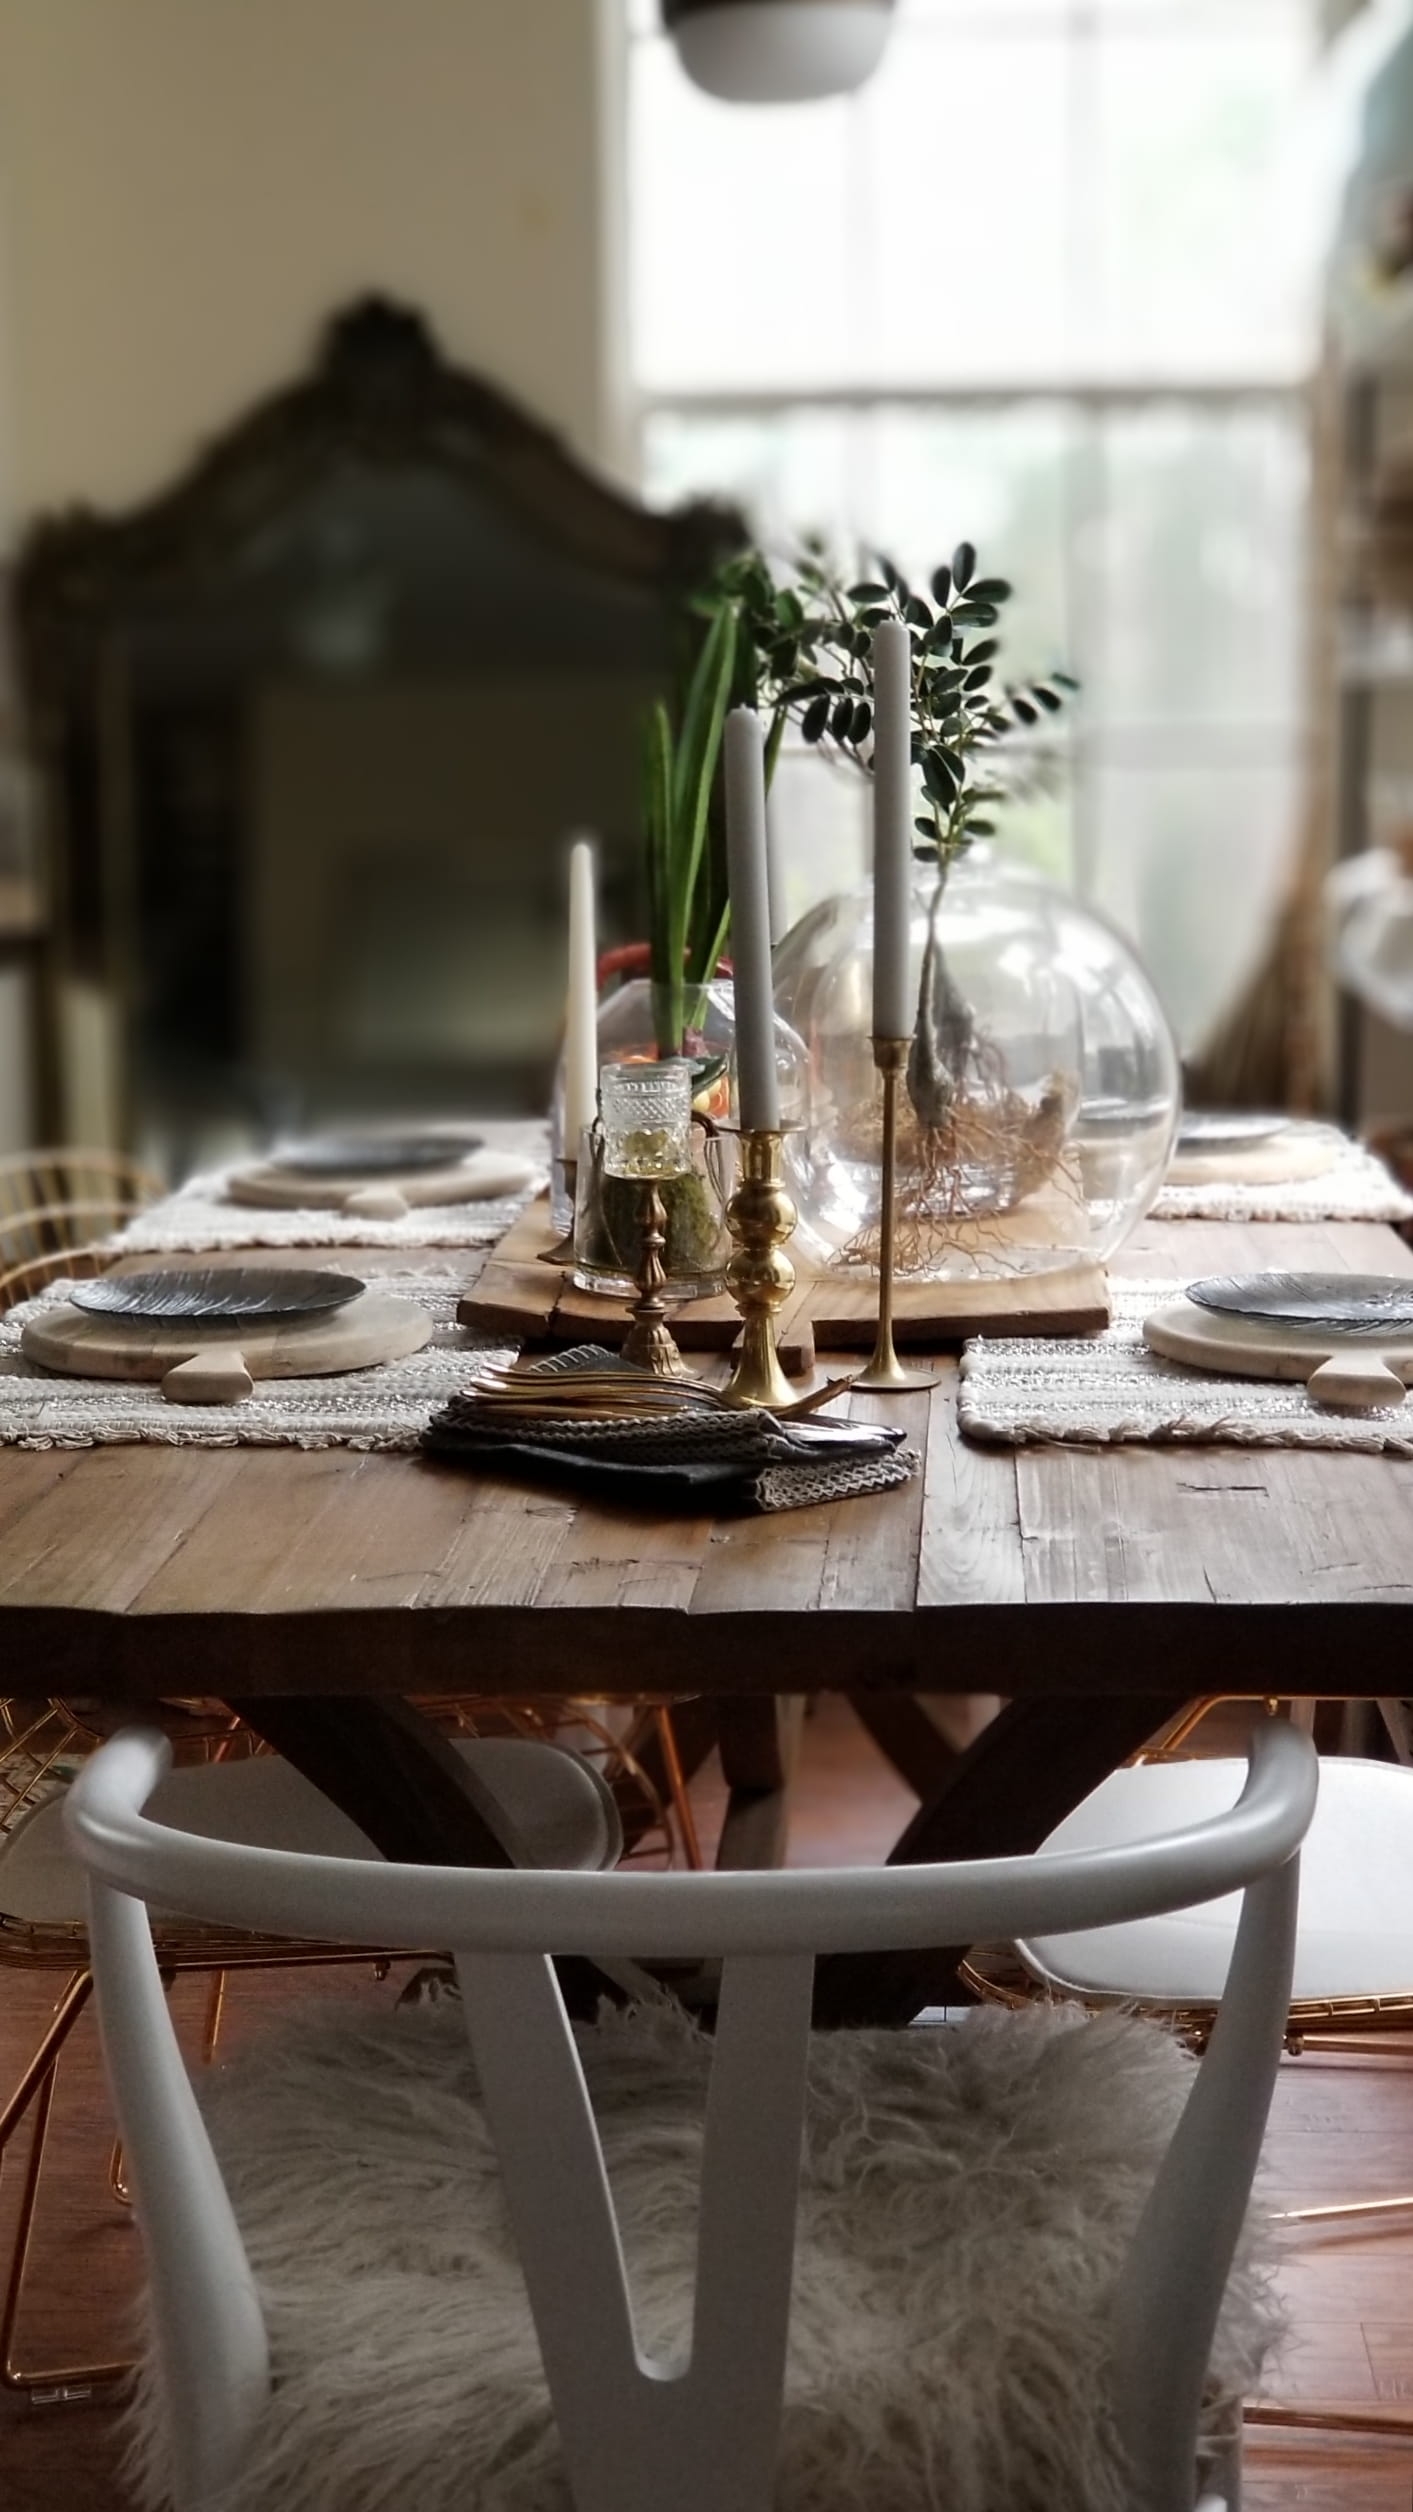 Hot New Decor Design Style 2019 Farmhouse Table Wood Glass Mixed Metals Candles Plants Scandinavian Boho Urban Chic Modern Rustic Dining Kitchen Tablescape Breadboard